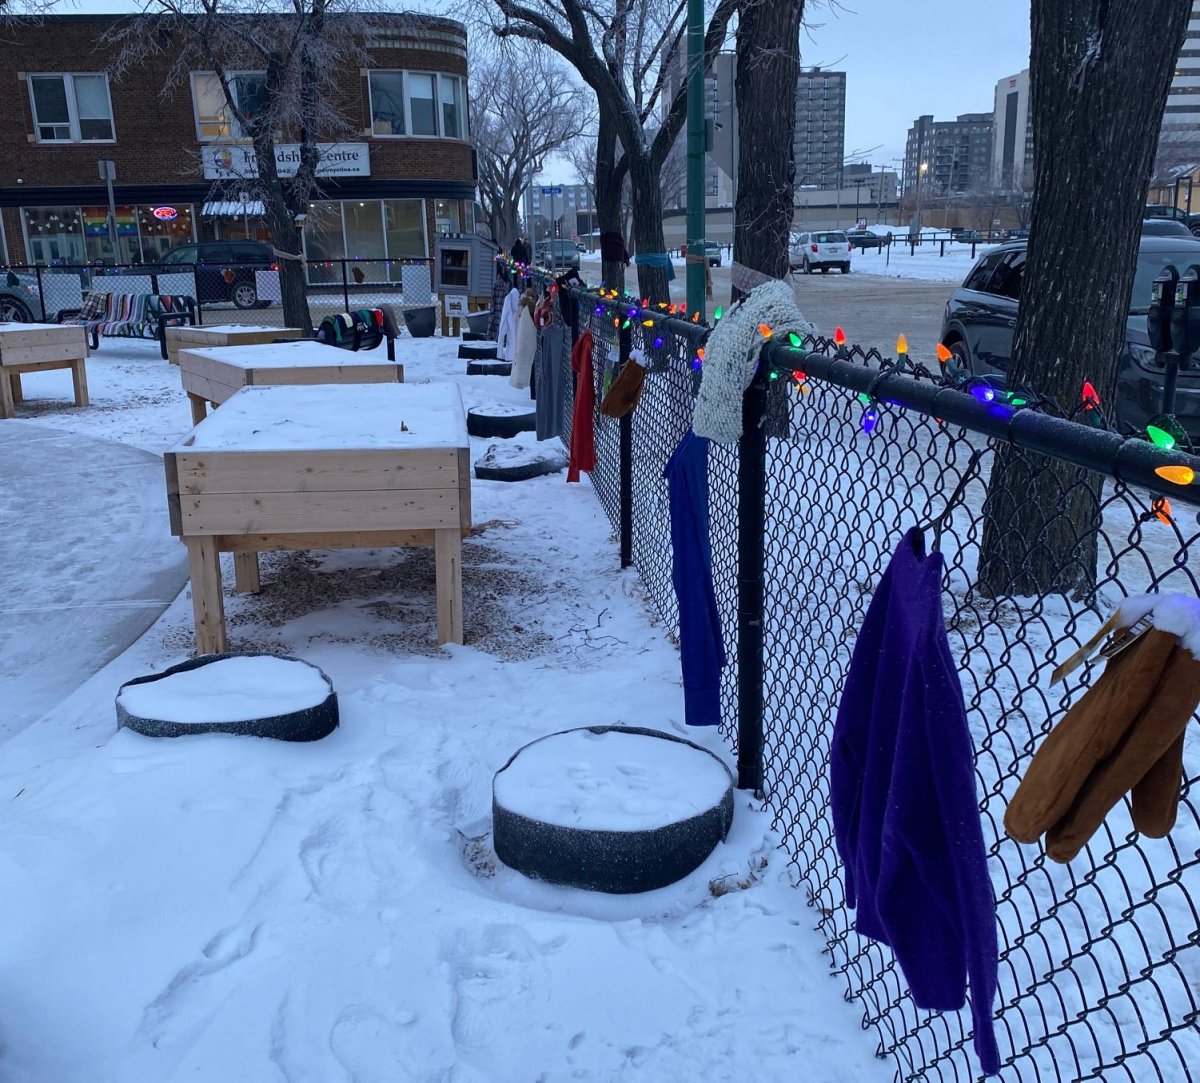 The Heritage Community Association held a 'scarf bombing' event where members placed more than 1,000 winter items within the neighbourhood to help those in need.